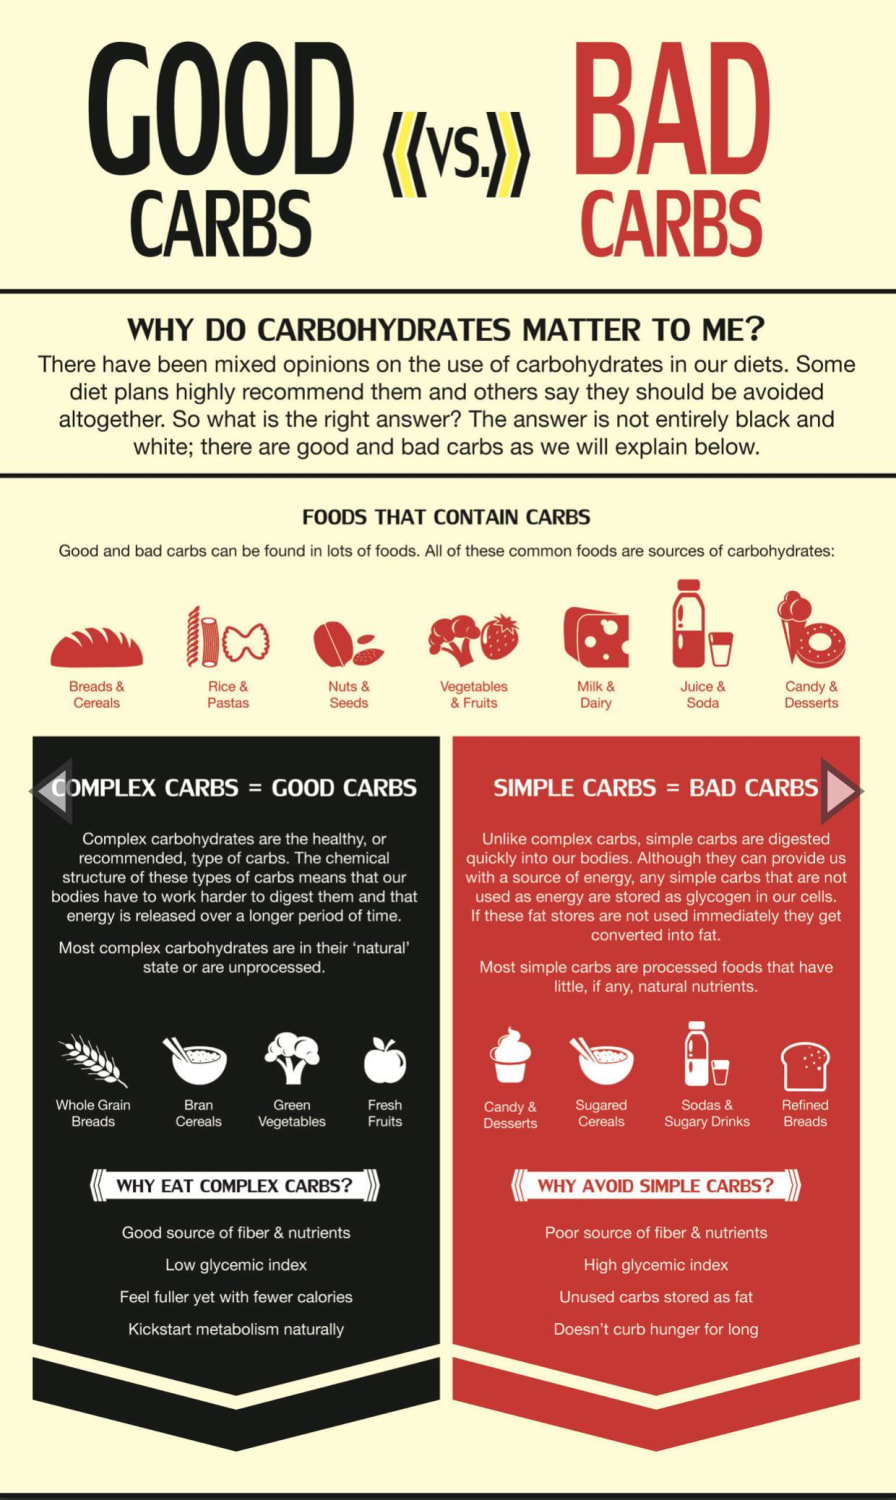 I had trouble finding things to eat when I started my low carb diet, I could not find much without carbs and did was not aware of “good carbs- bad carbs”.